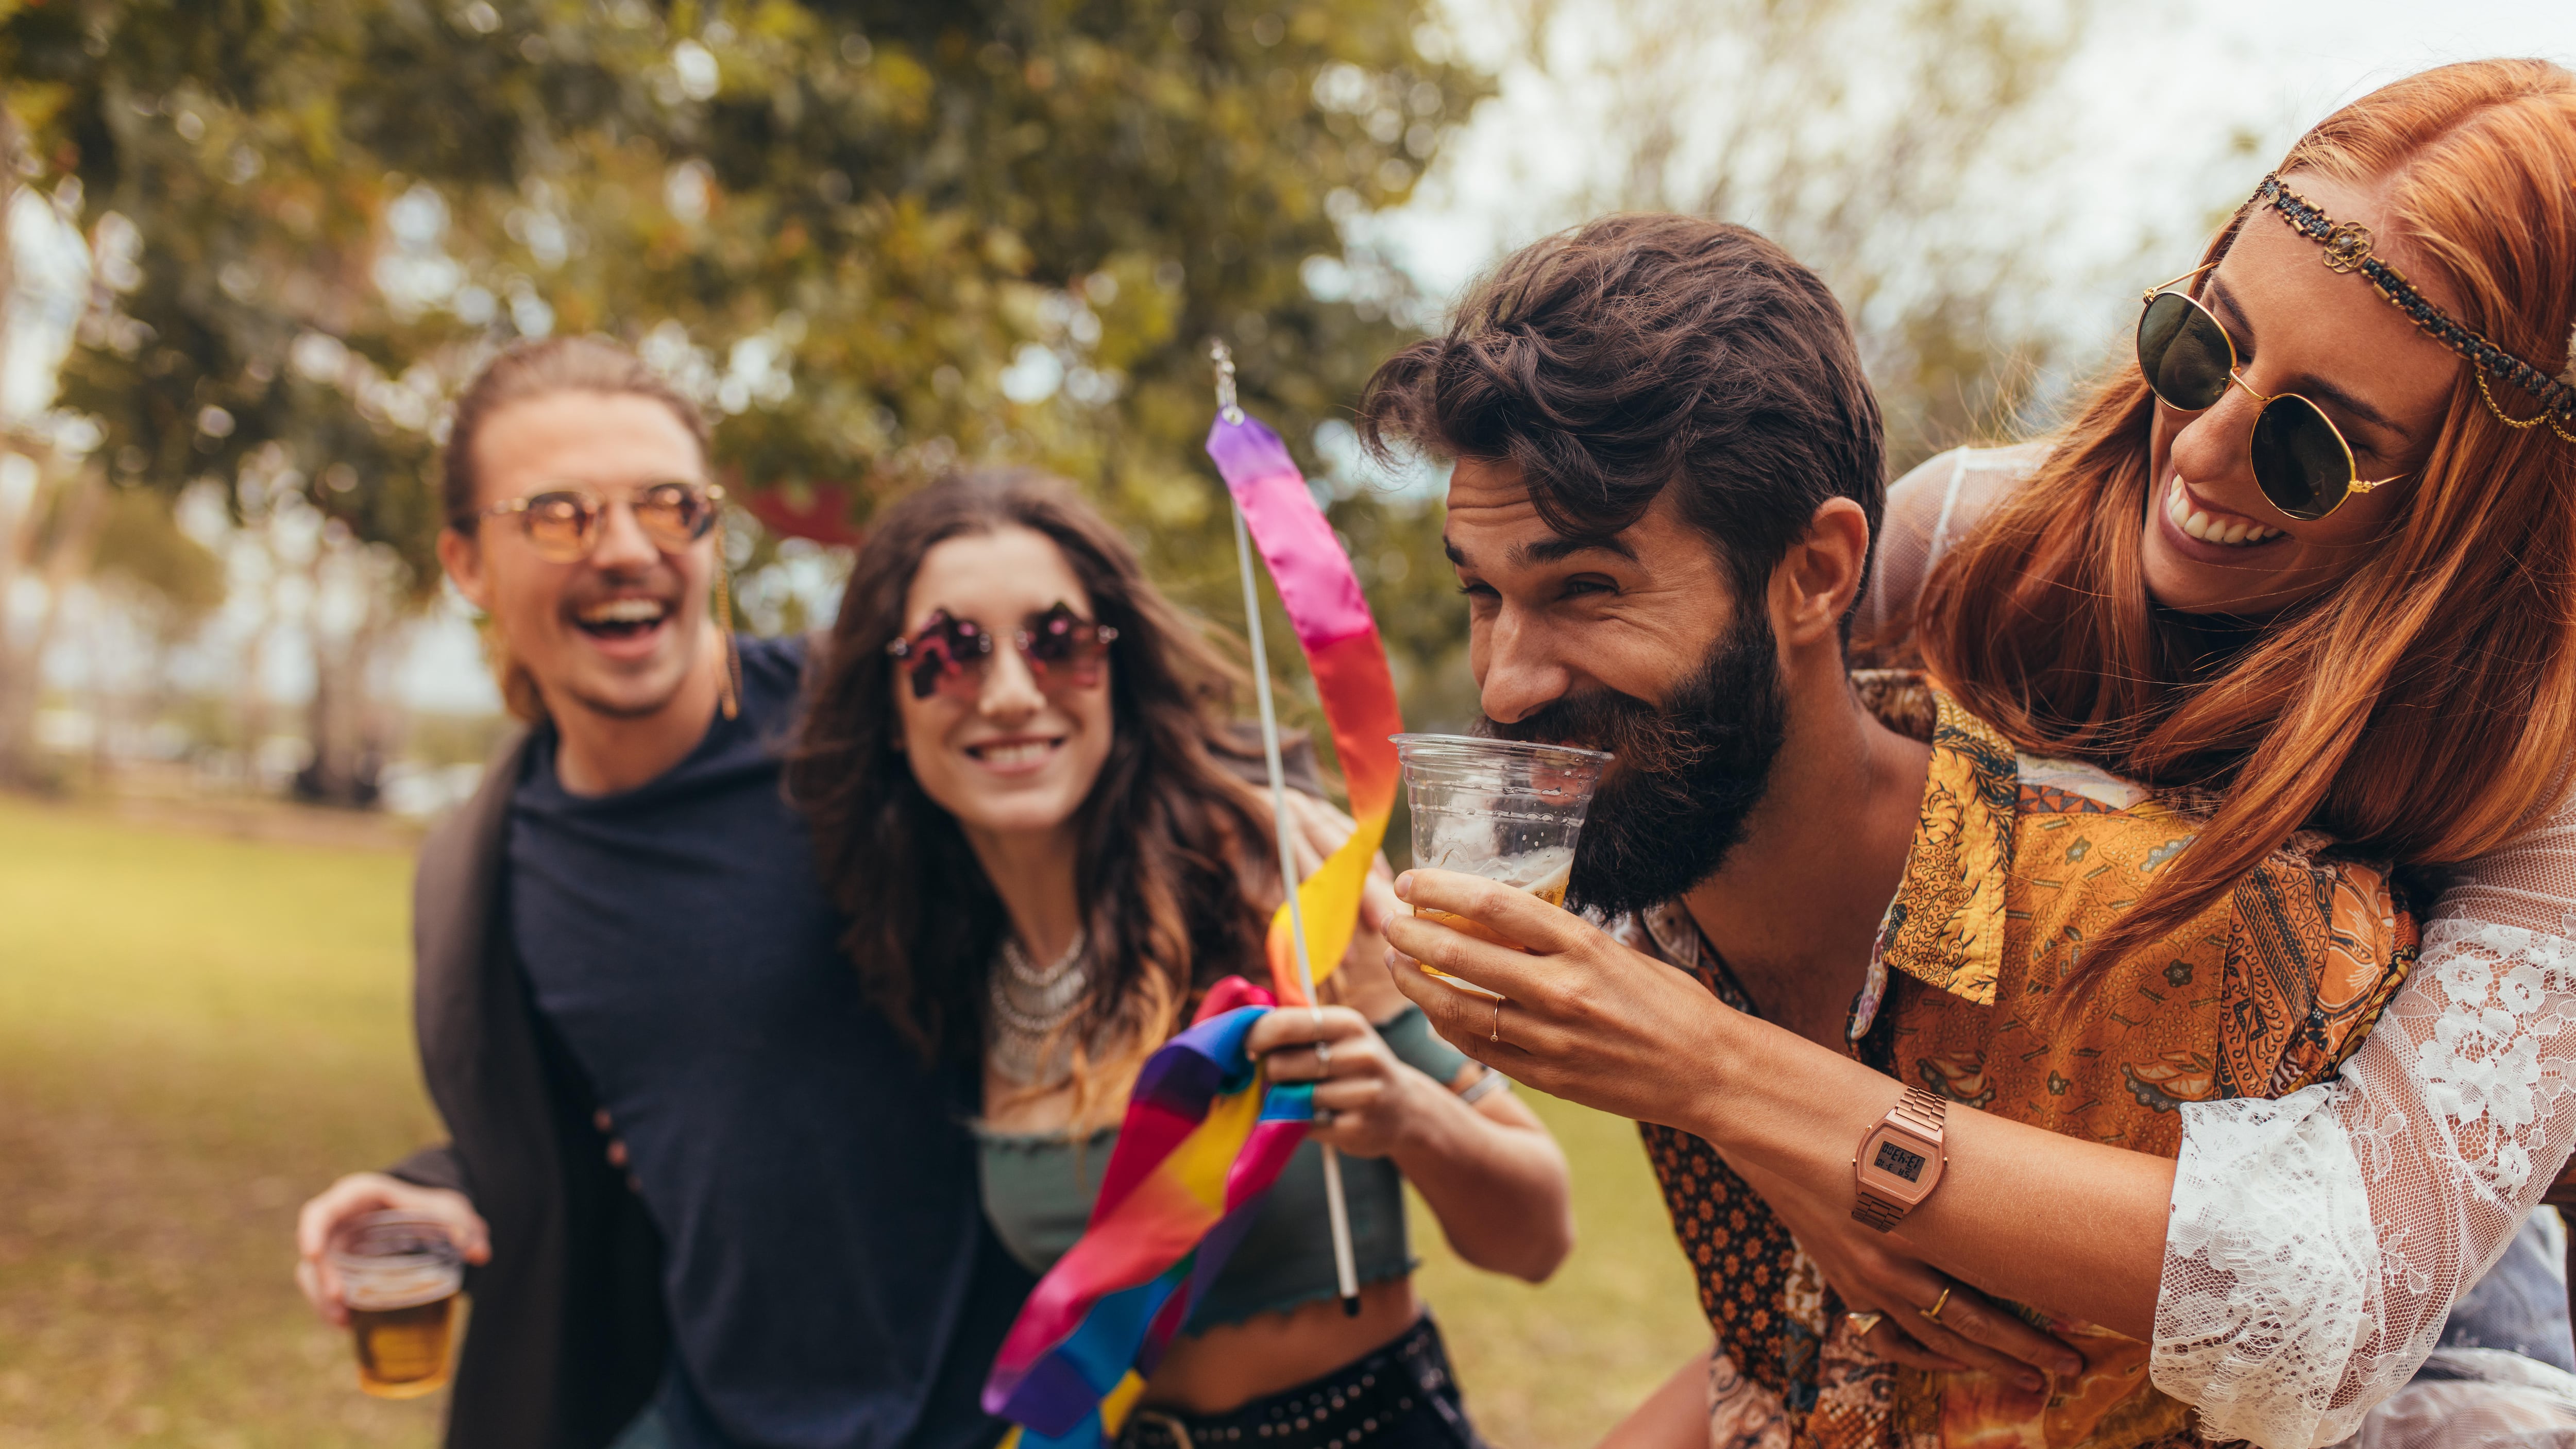 Inventive ways to look after your teeth during festival season